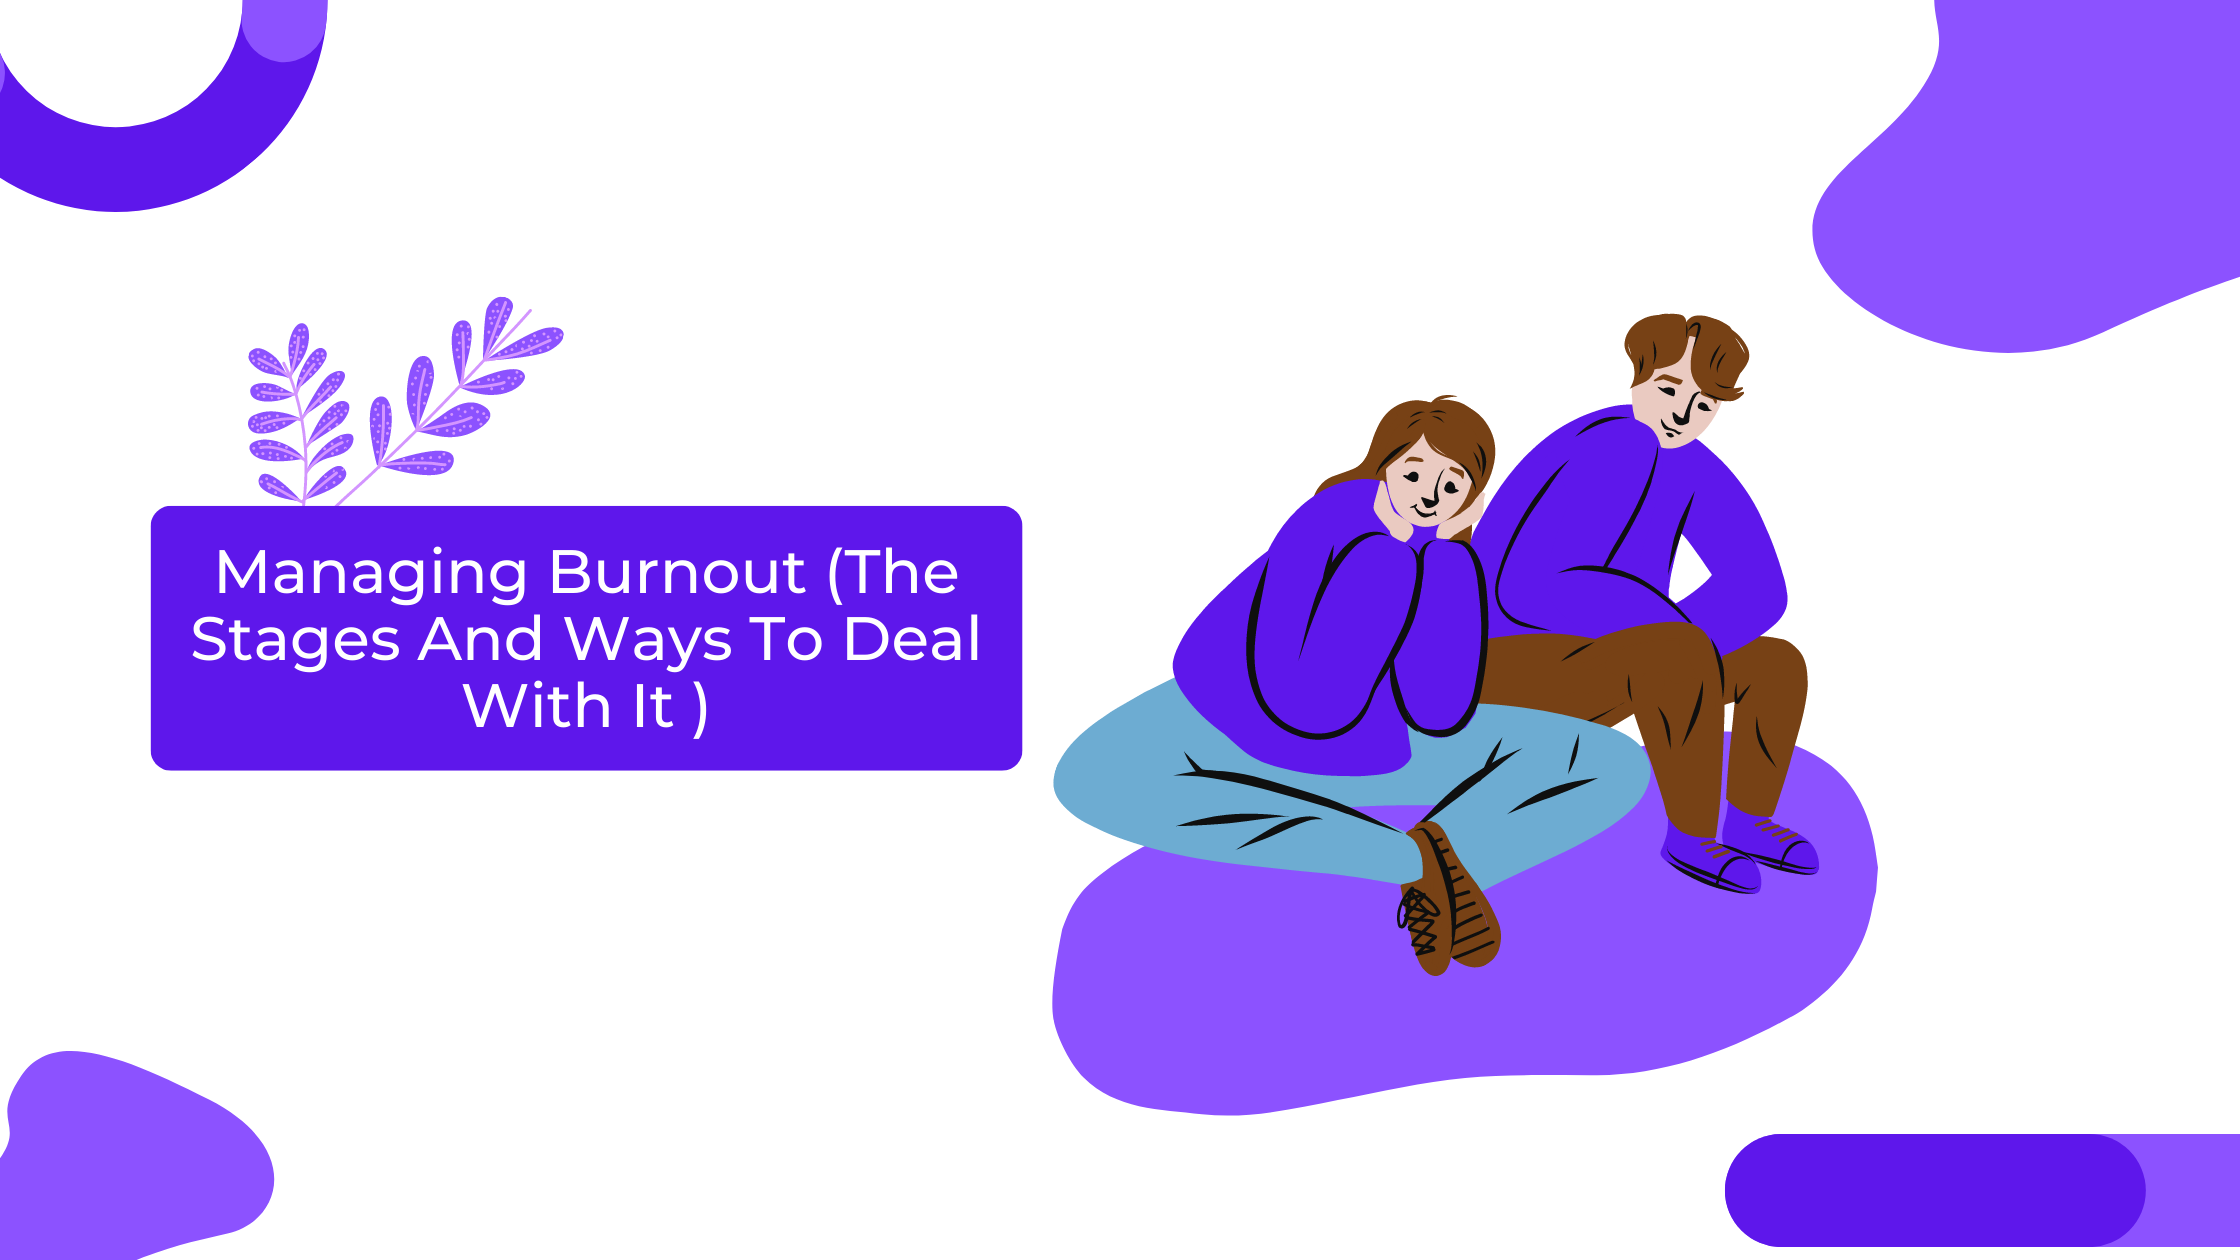 Managing Burnout -The Stages And Ways To Deal With It